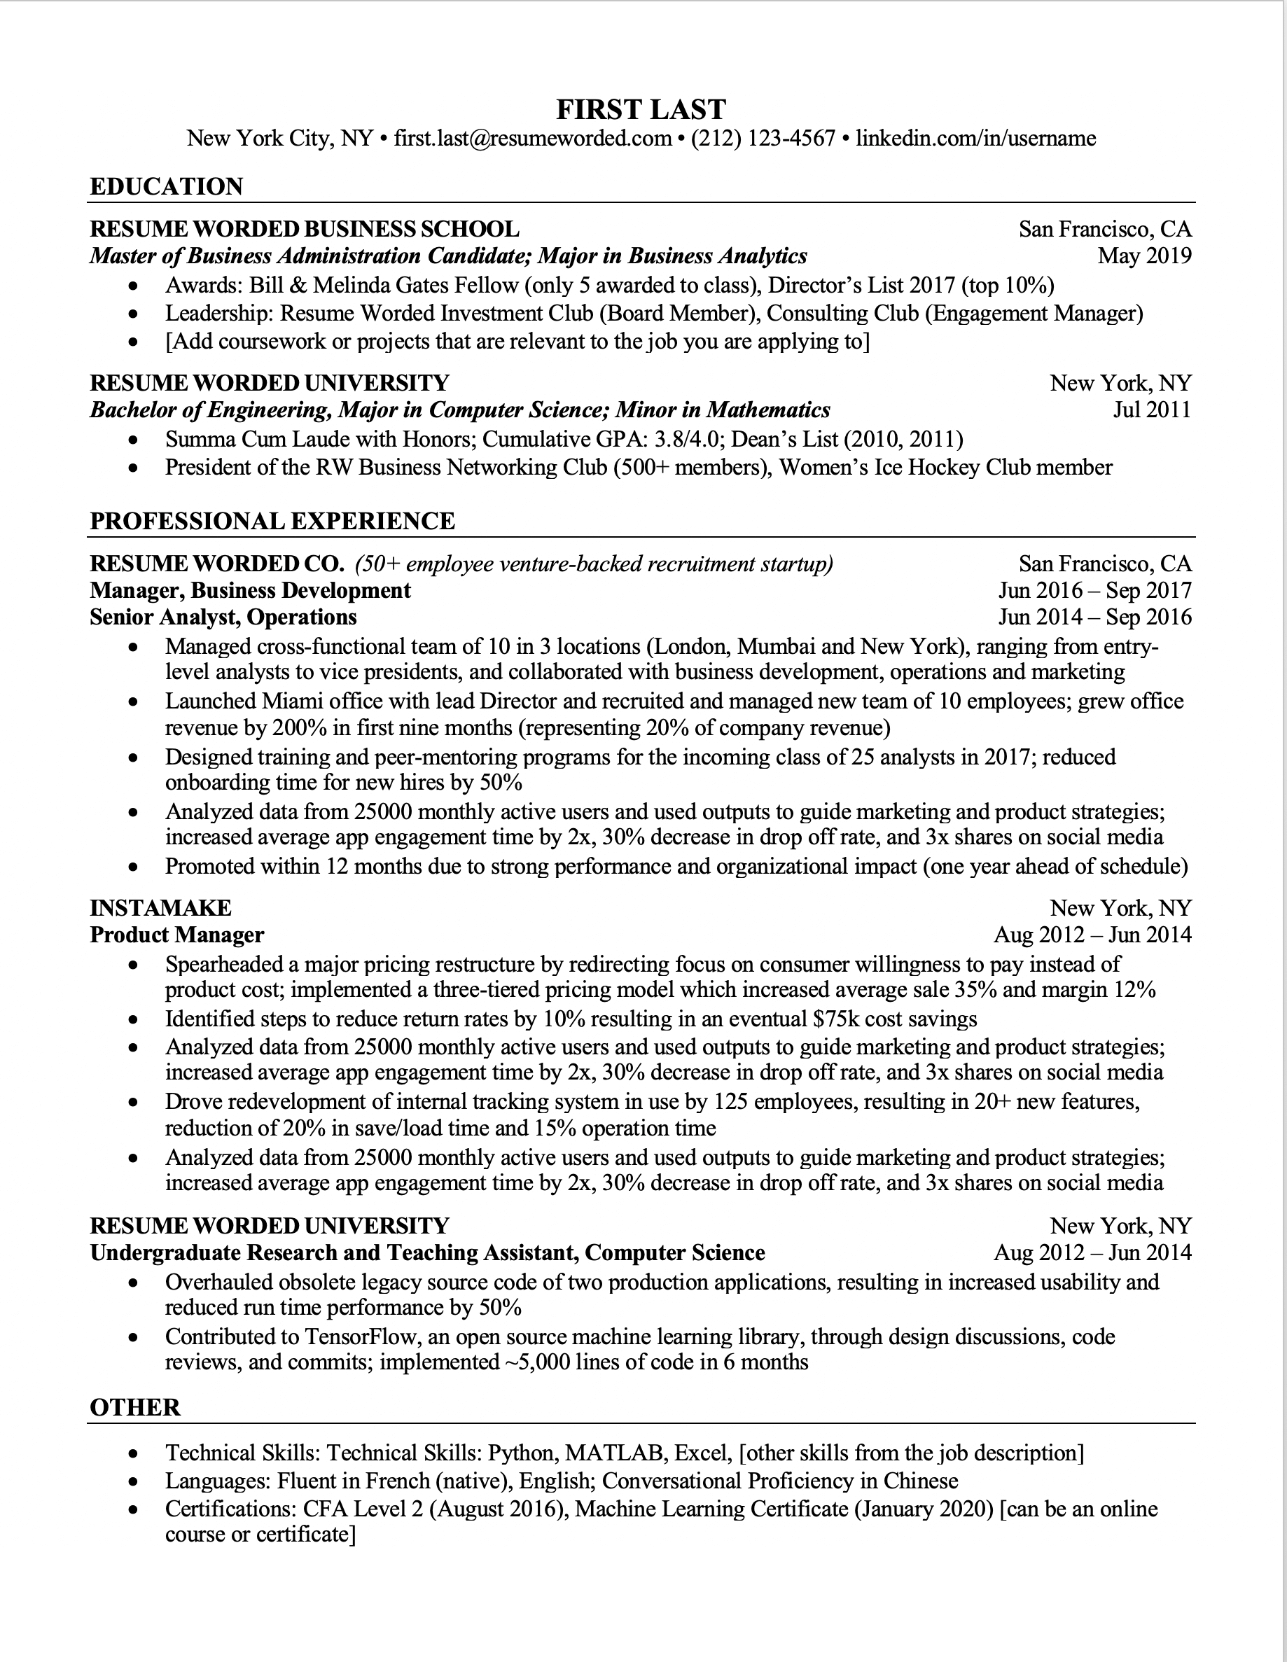 ats-compliant-resume-template-free-download-get-what-you-need-for-free